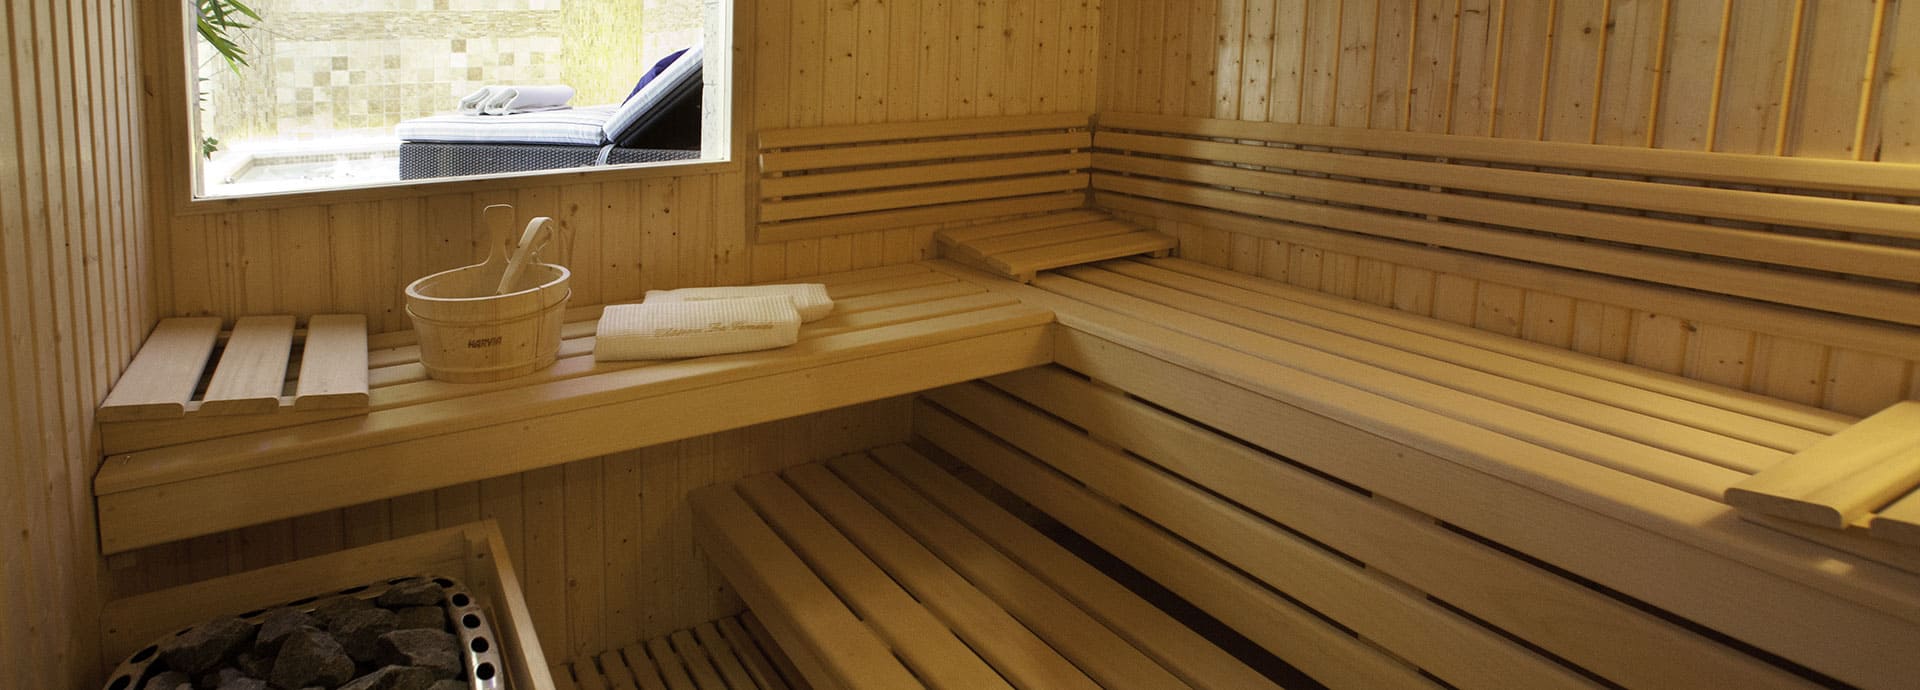 Maison Bacchus guests, in Domaine de la Vernède, can use the sauna free of charge